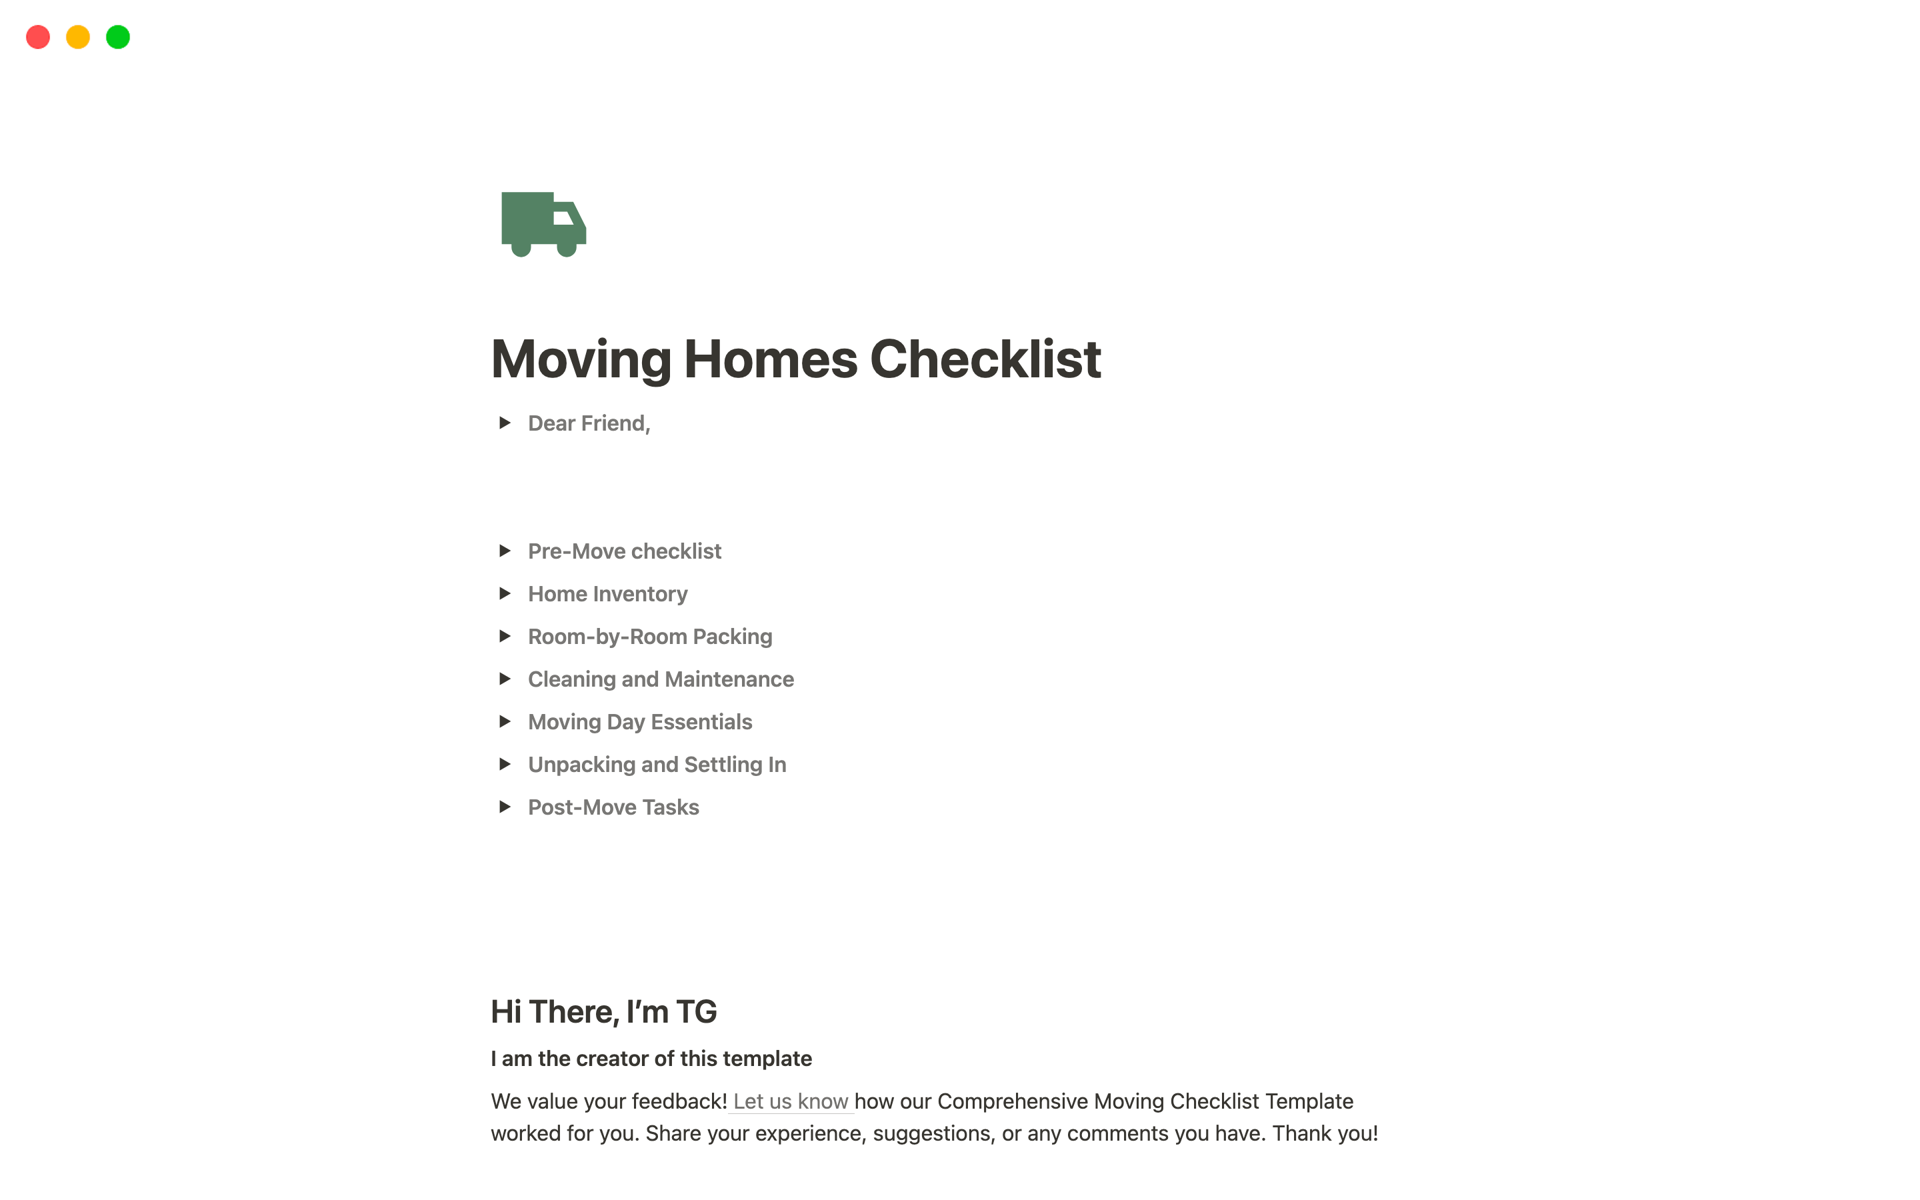 The Essential Moving Day Checklist